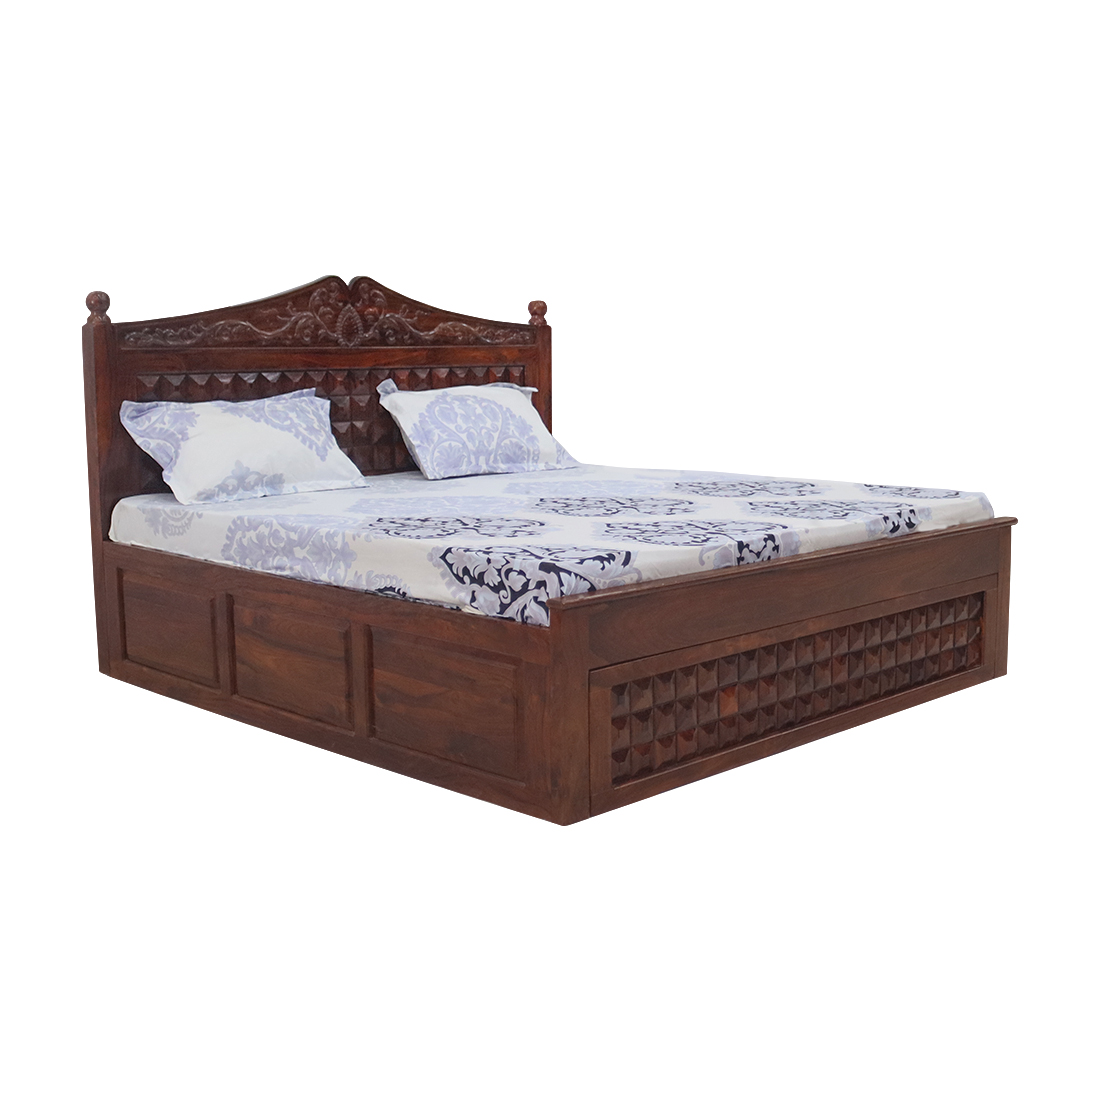 AARAM Solid Wood jali Design Bed with Box Storage